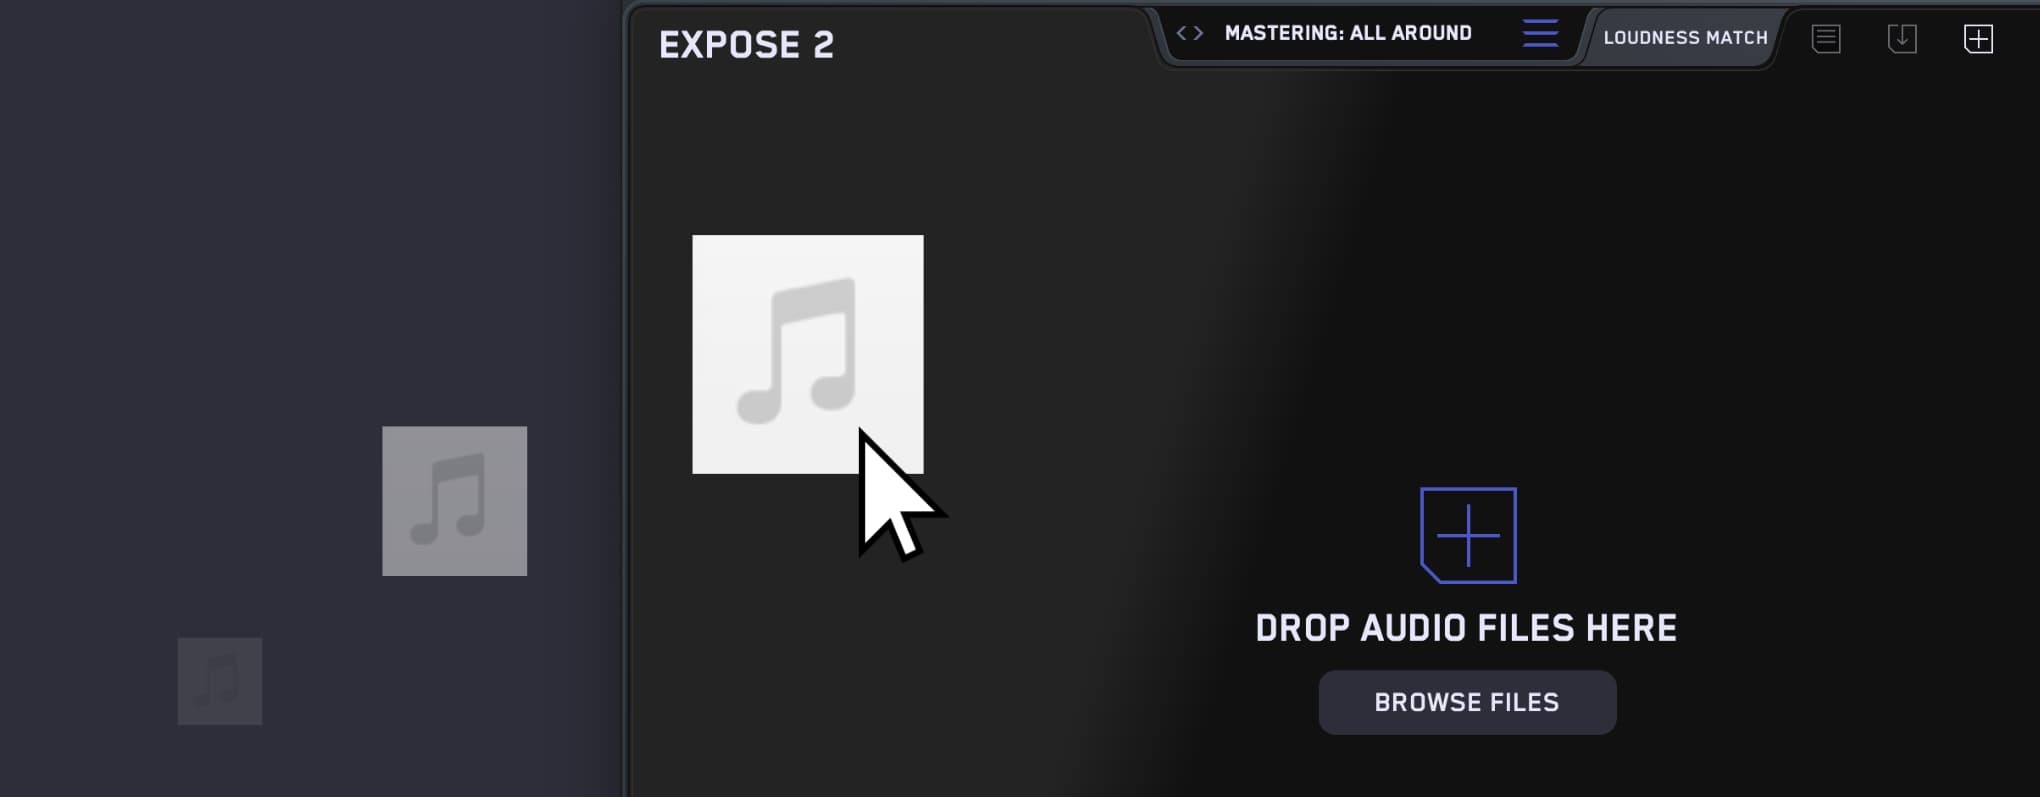 Drop your audio into EXPOSE